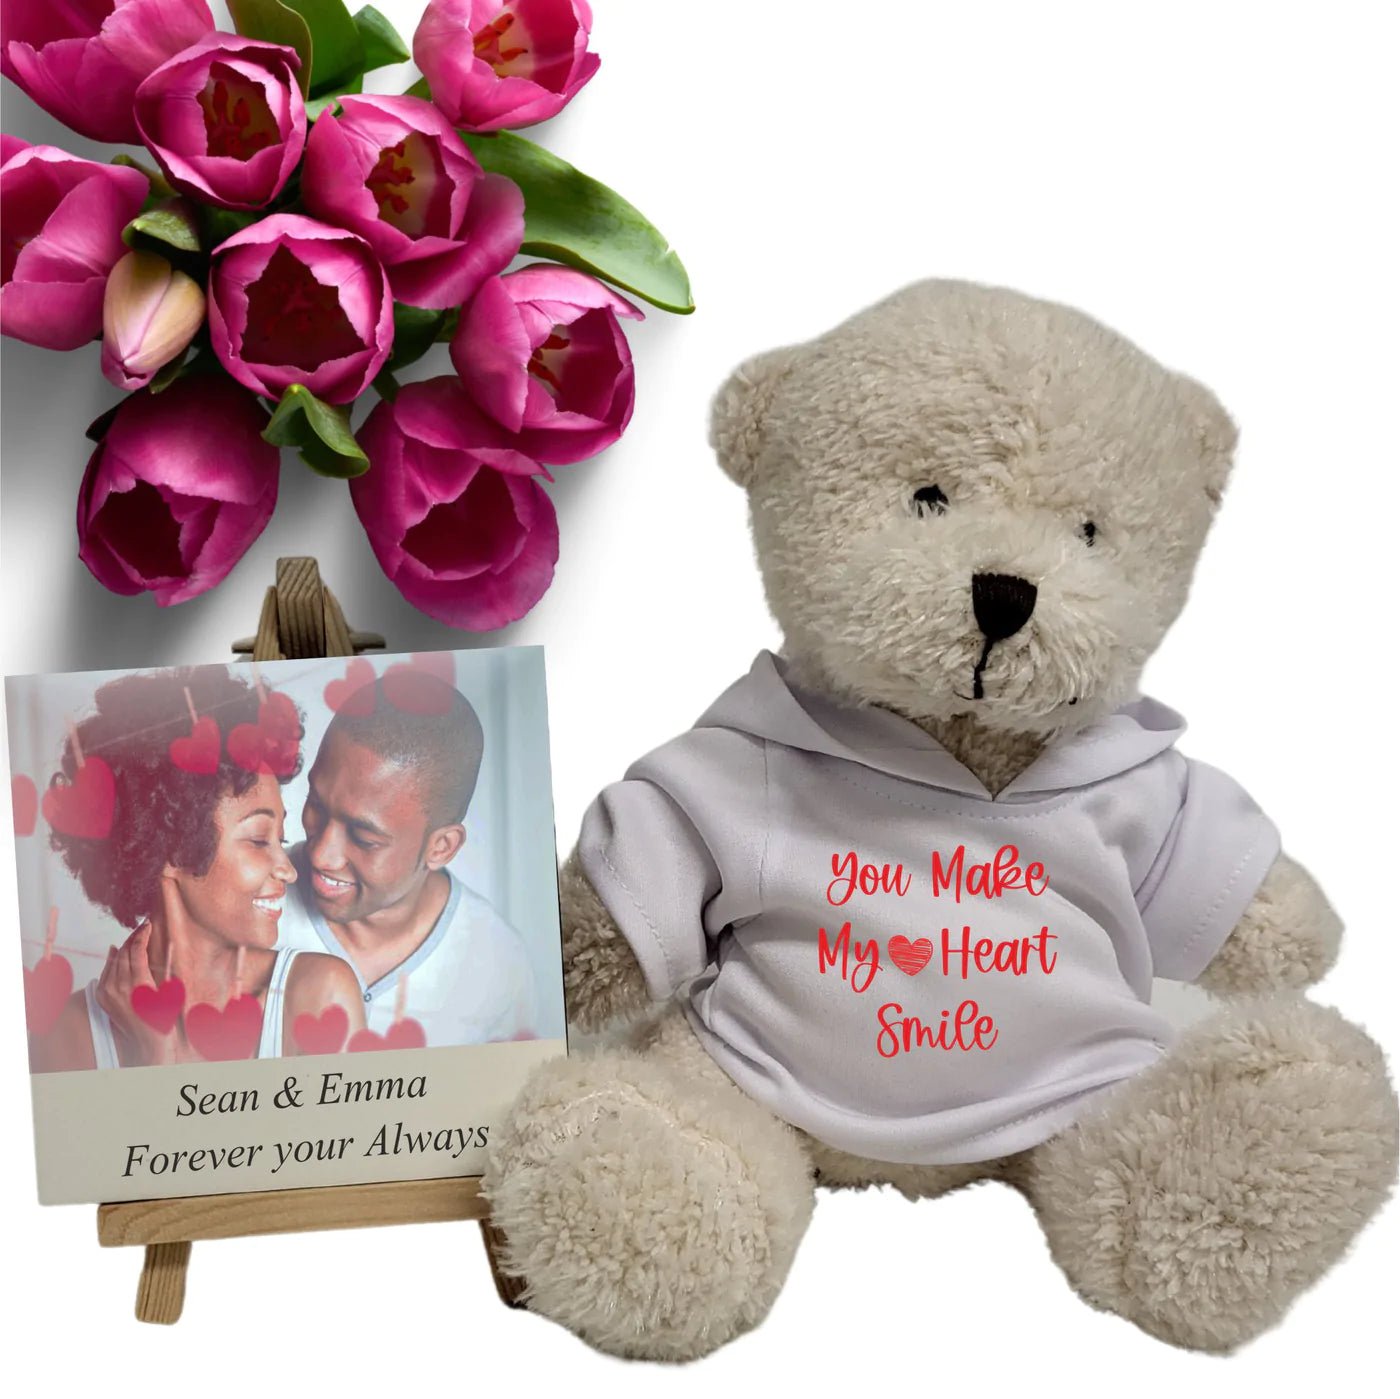 Pure Essence Greetings Your Make My Heart Smile Teddy & Photo Plaque Gift Set - Stuffed & Plush Animals - British D'sire